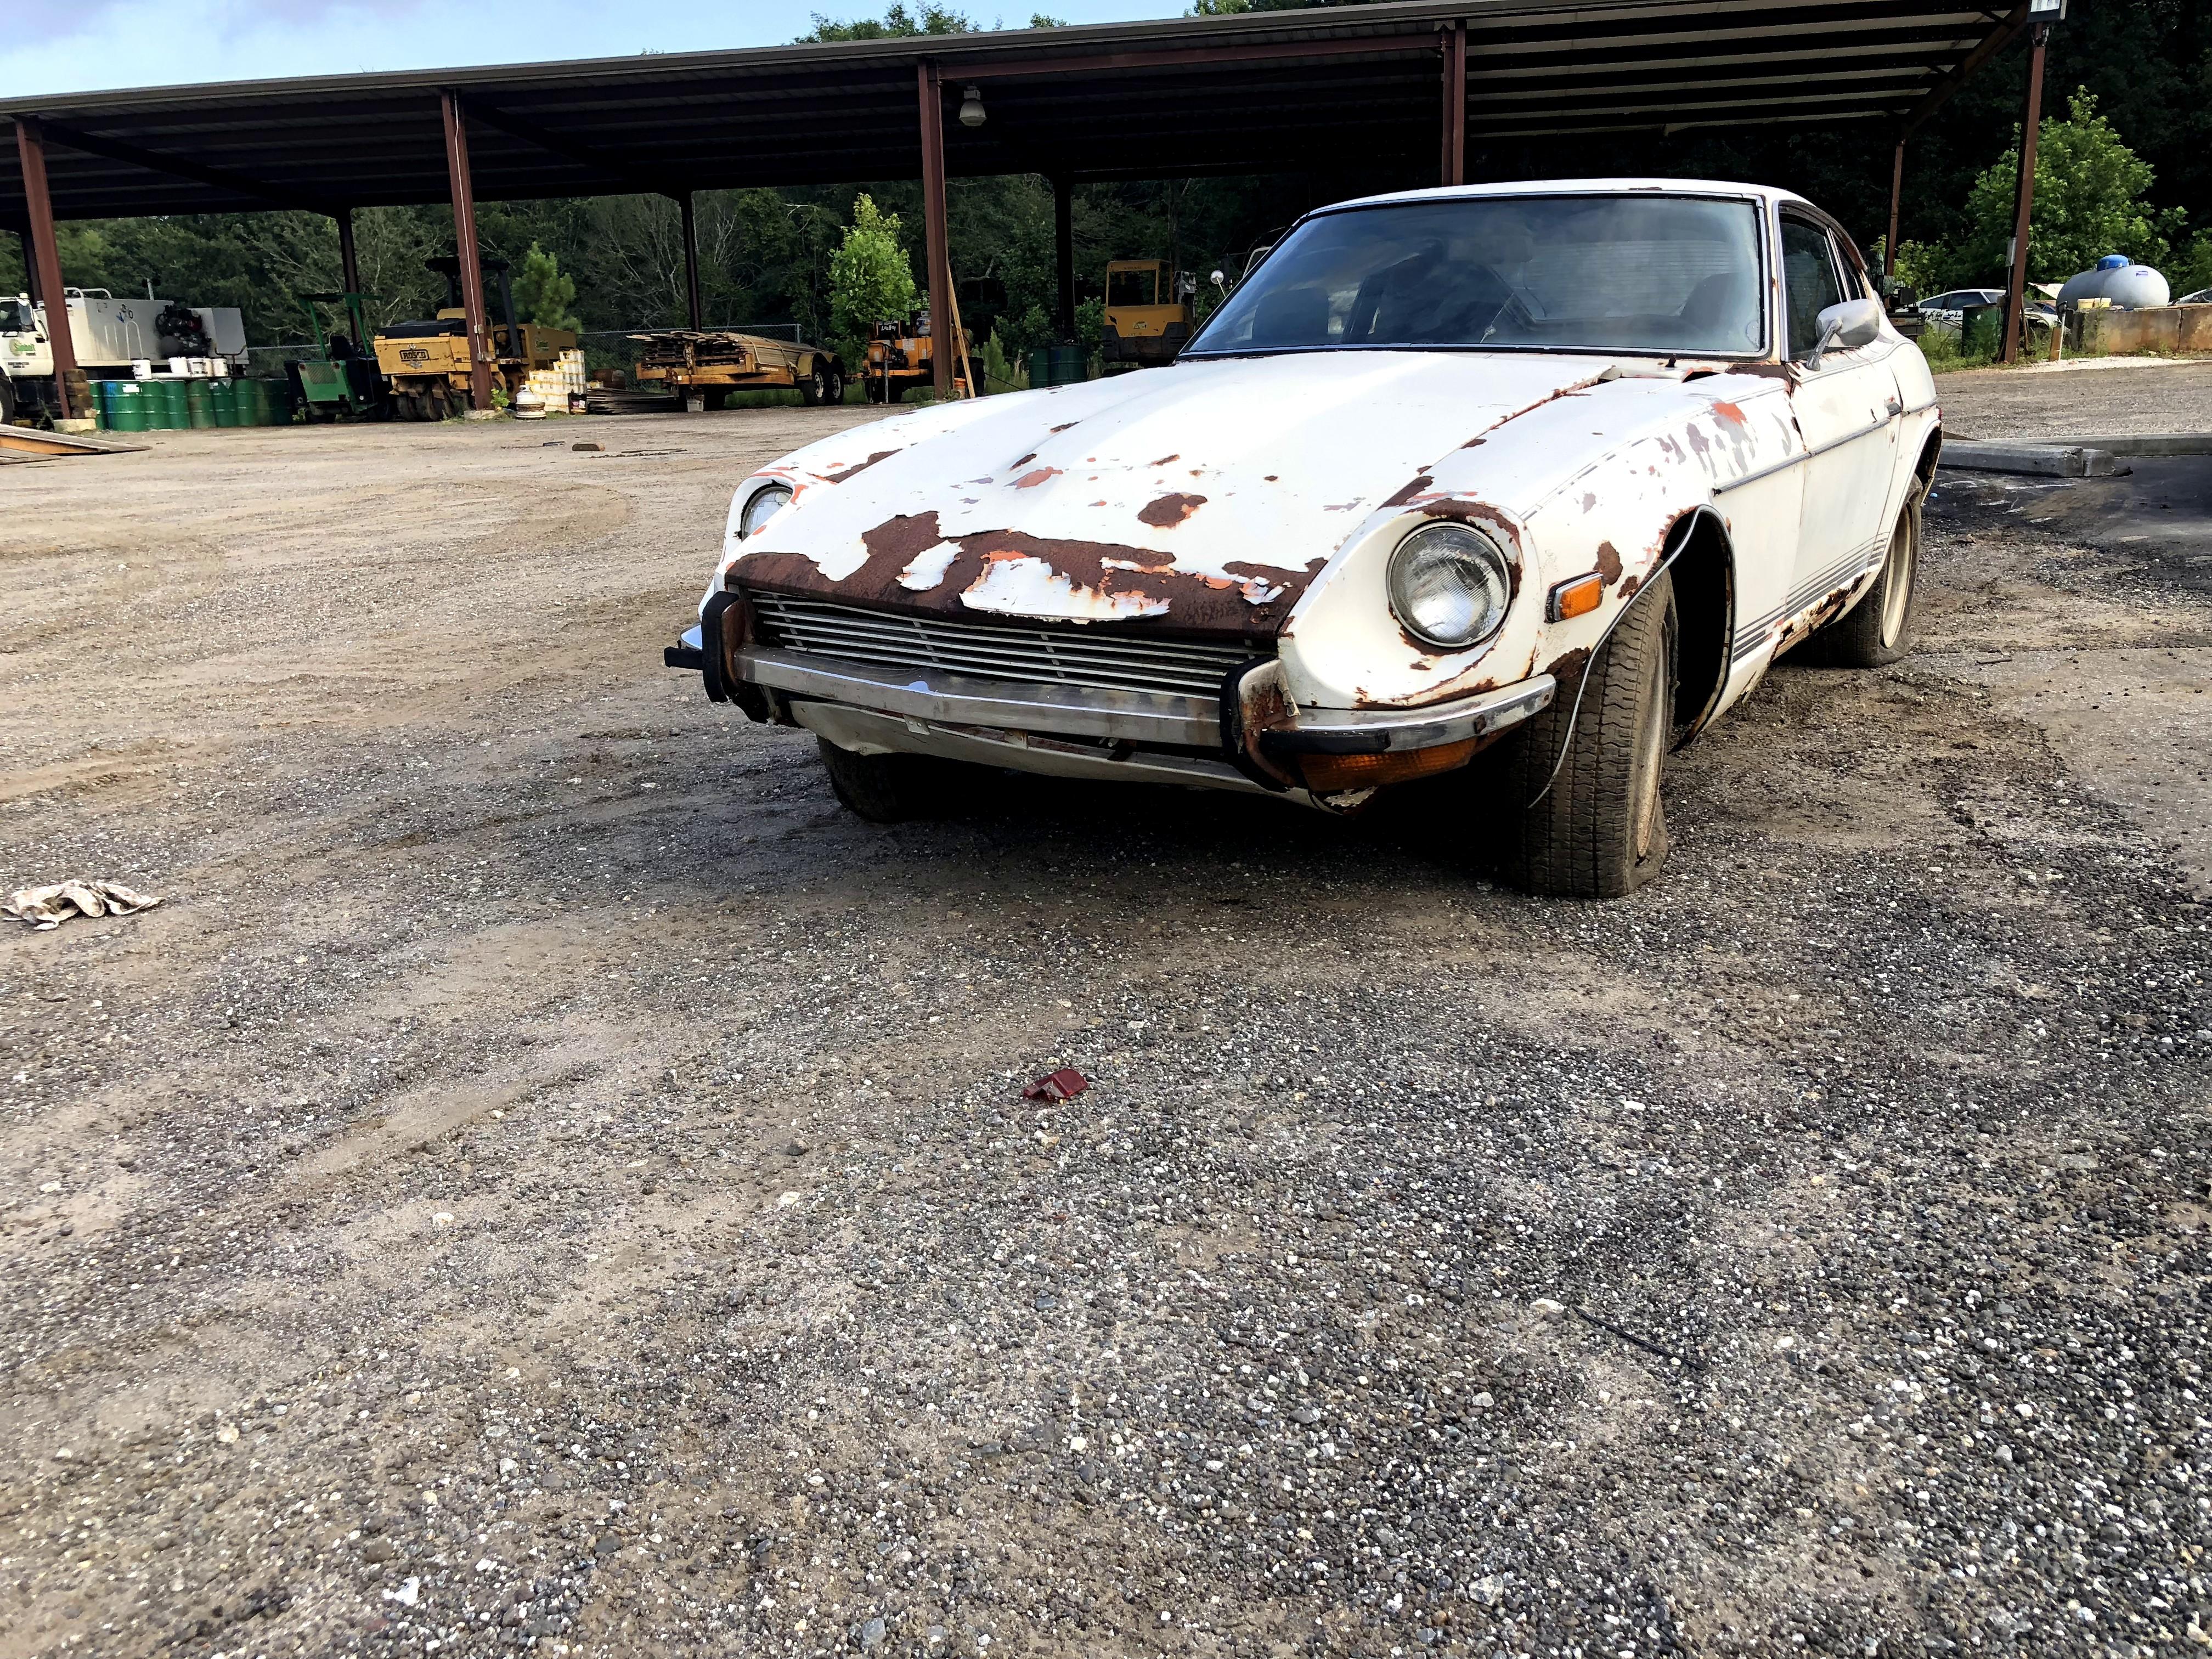 Z cars for sale in the southeast - For Sale - The Classic Zcar Club